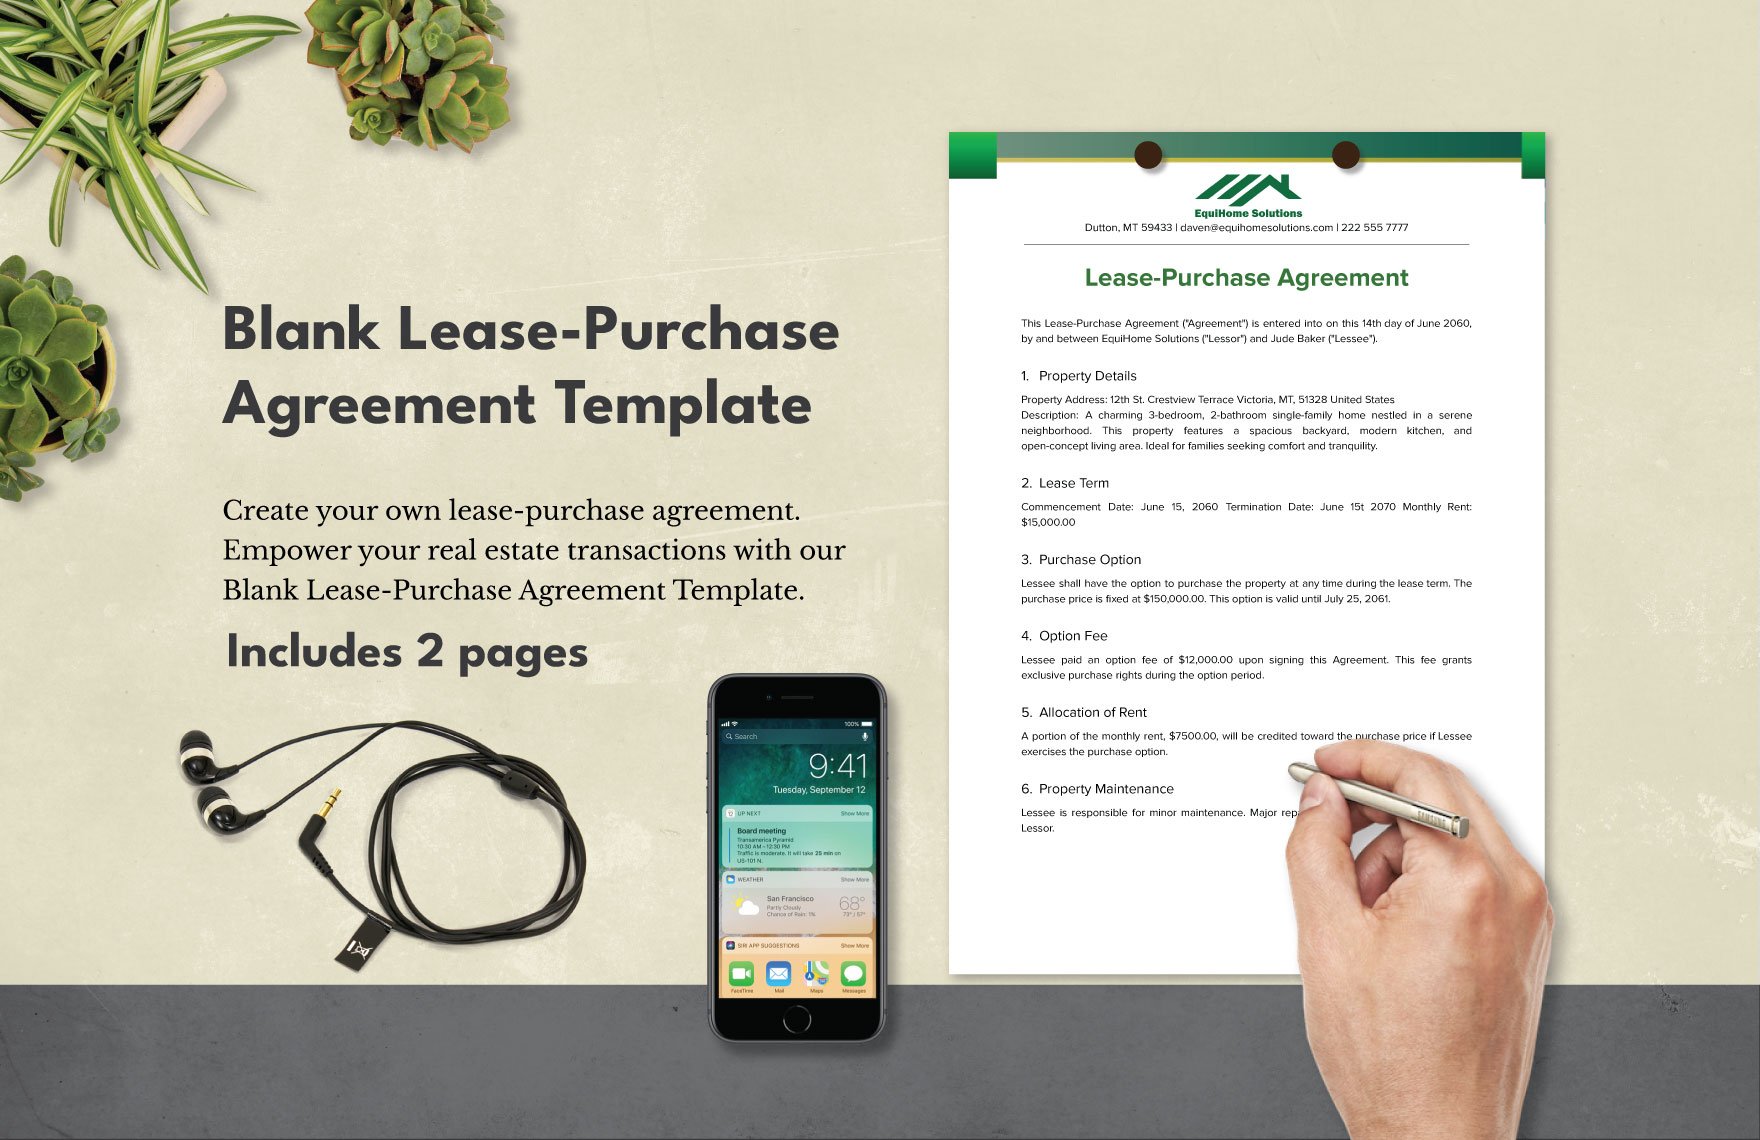 Blank Lease-Purchase Agreement Template